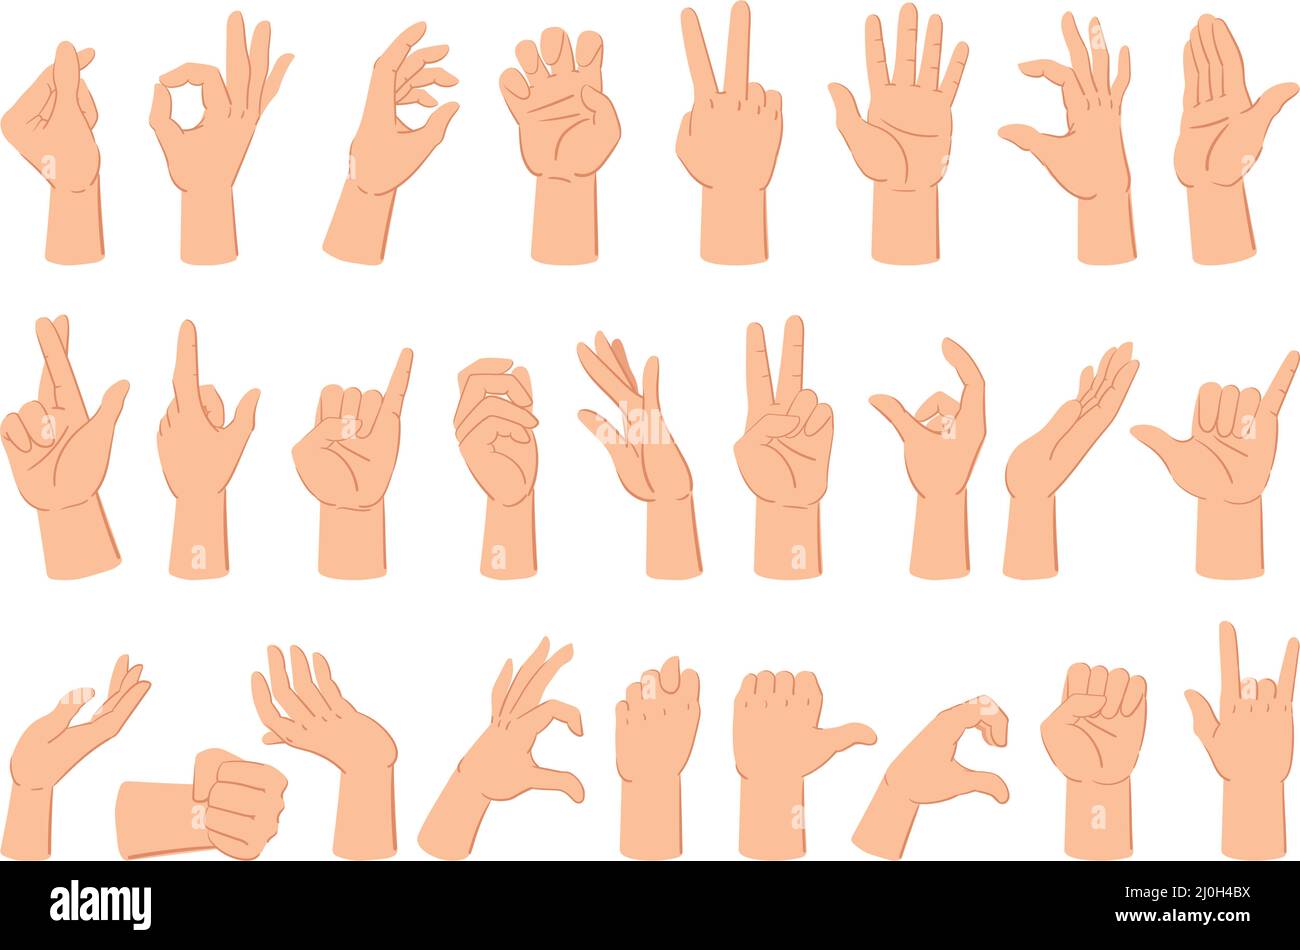 Cartoon human hand expression gestures, counting fingers and thumb up. Hand gestures, human arm palm gesture communication vector illustration set Stock Vector